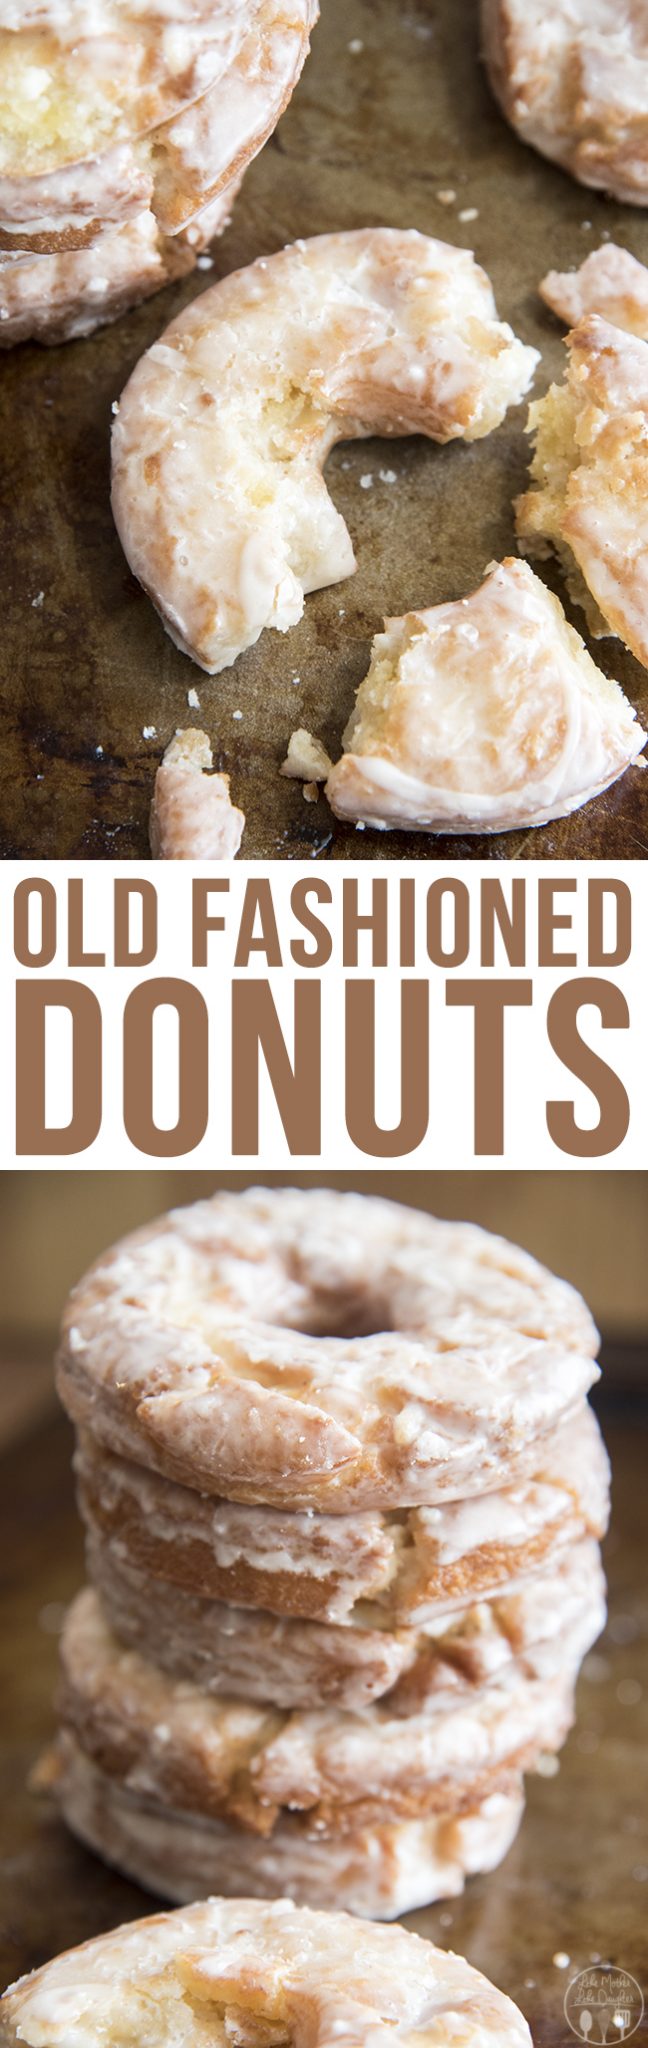 Title card of old fashioned donuts.